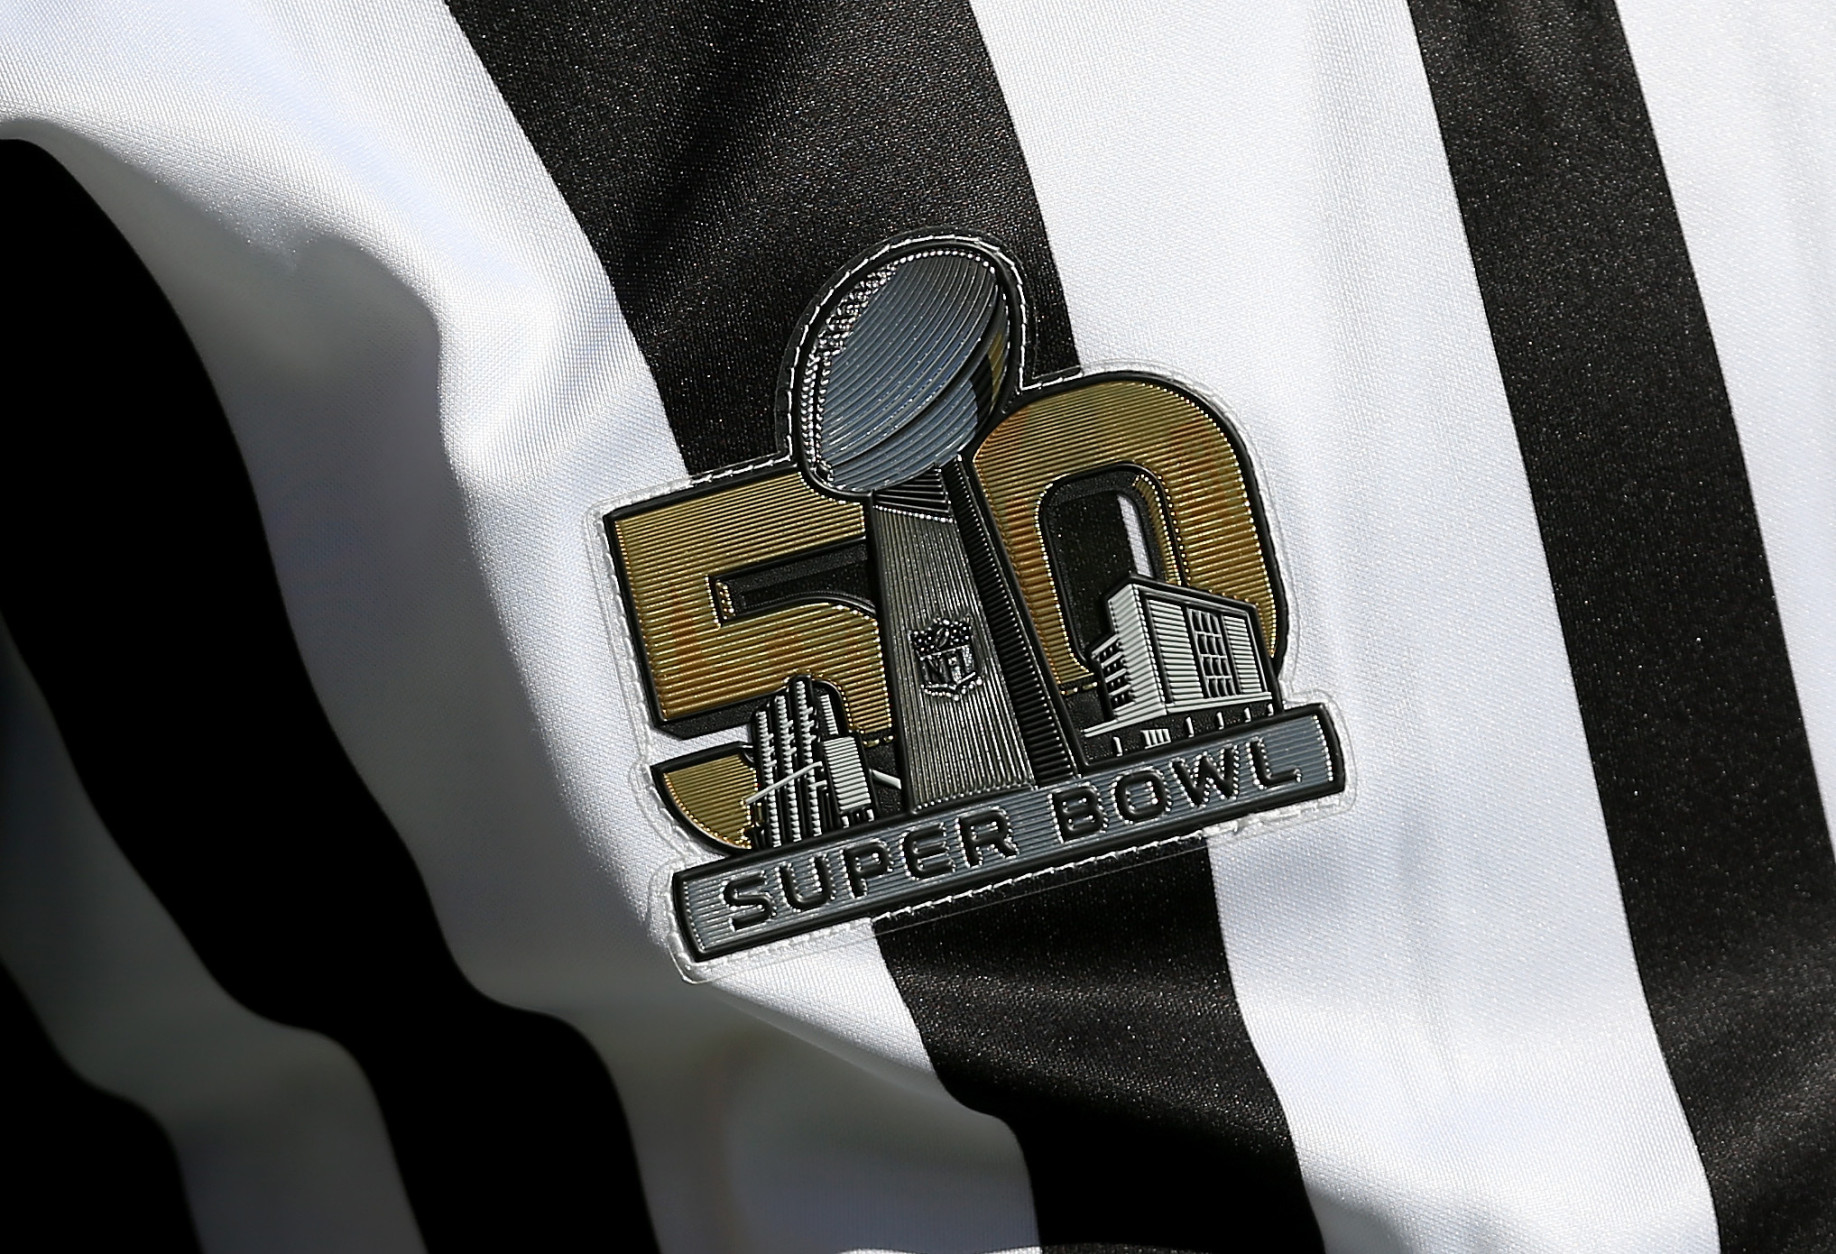 SANTA CLARA, CA - FEBRUARY 07:  A detail view of the logo on a referee uniform is seen prior to Super Bowl 50 at Levi's Stadium on February 7, 2016 in Santa Clara, California.  (Photo by Patrick Smith/Getty Images)